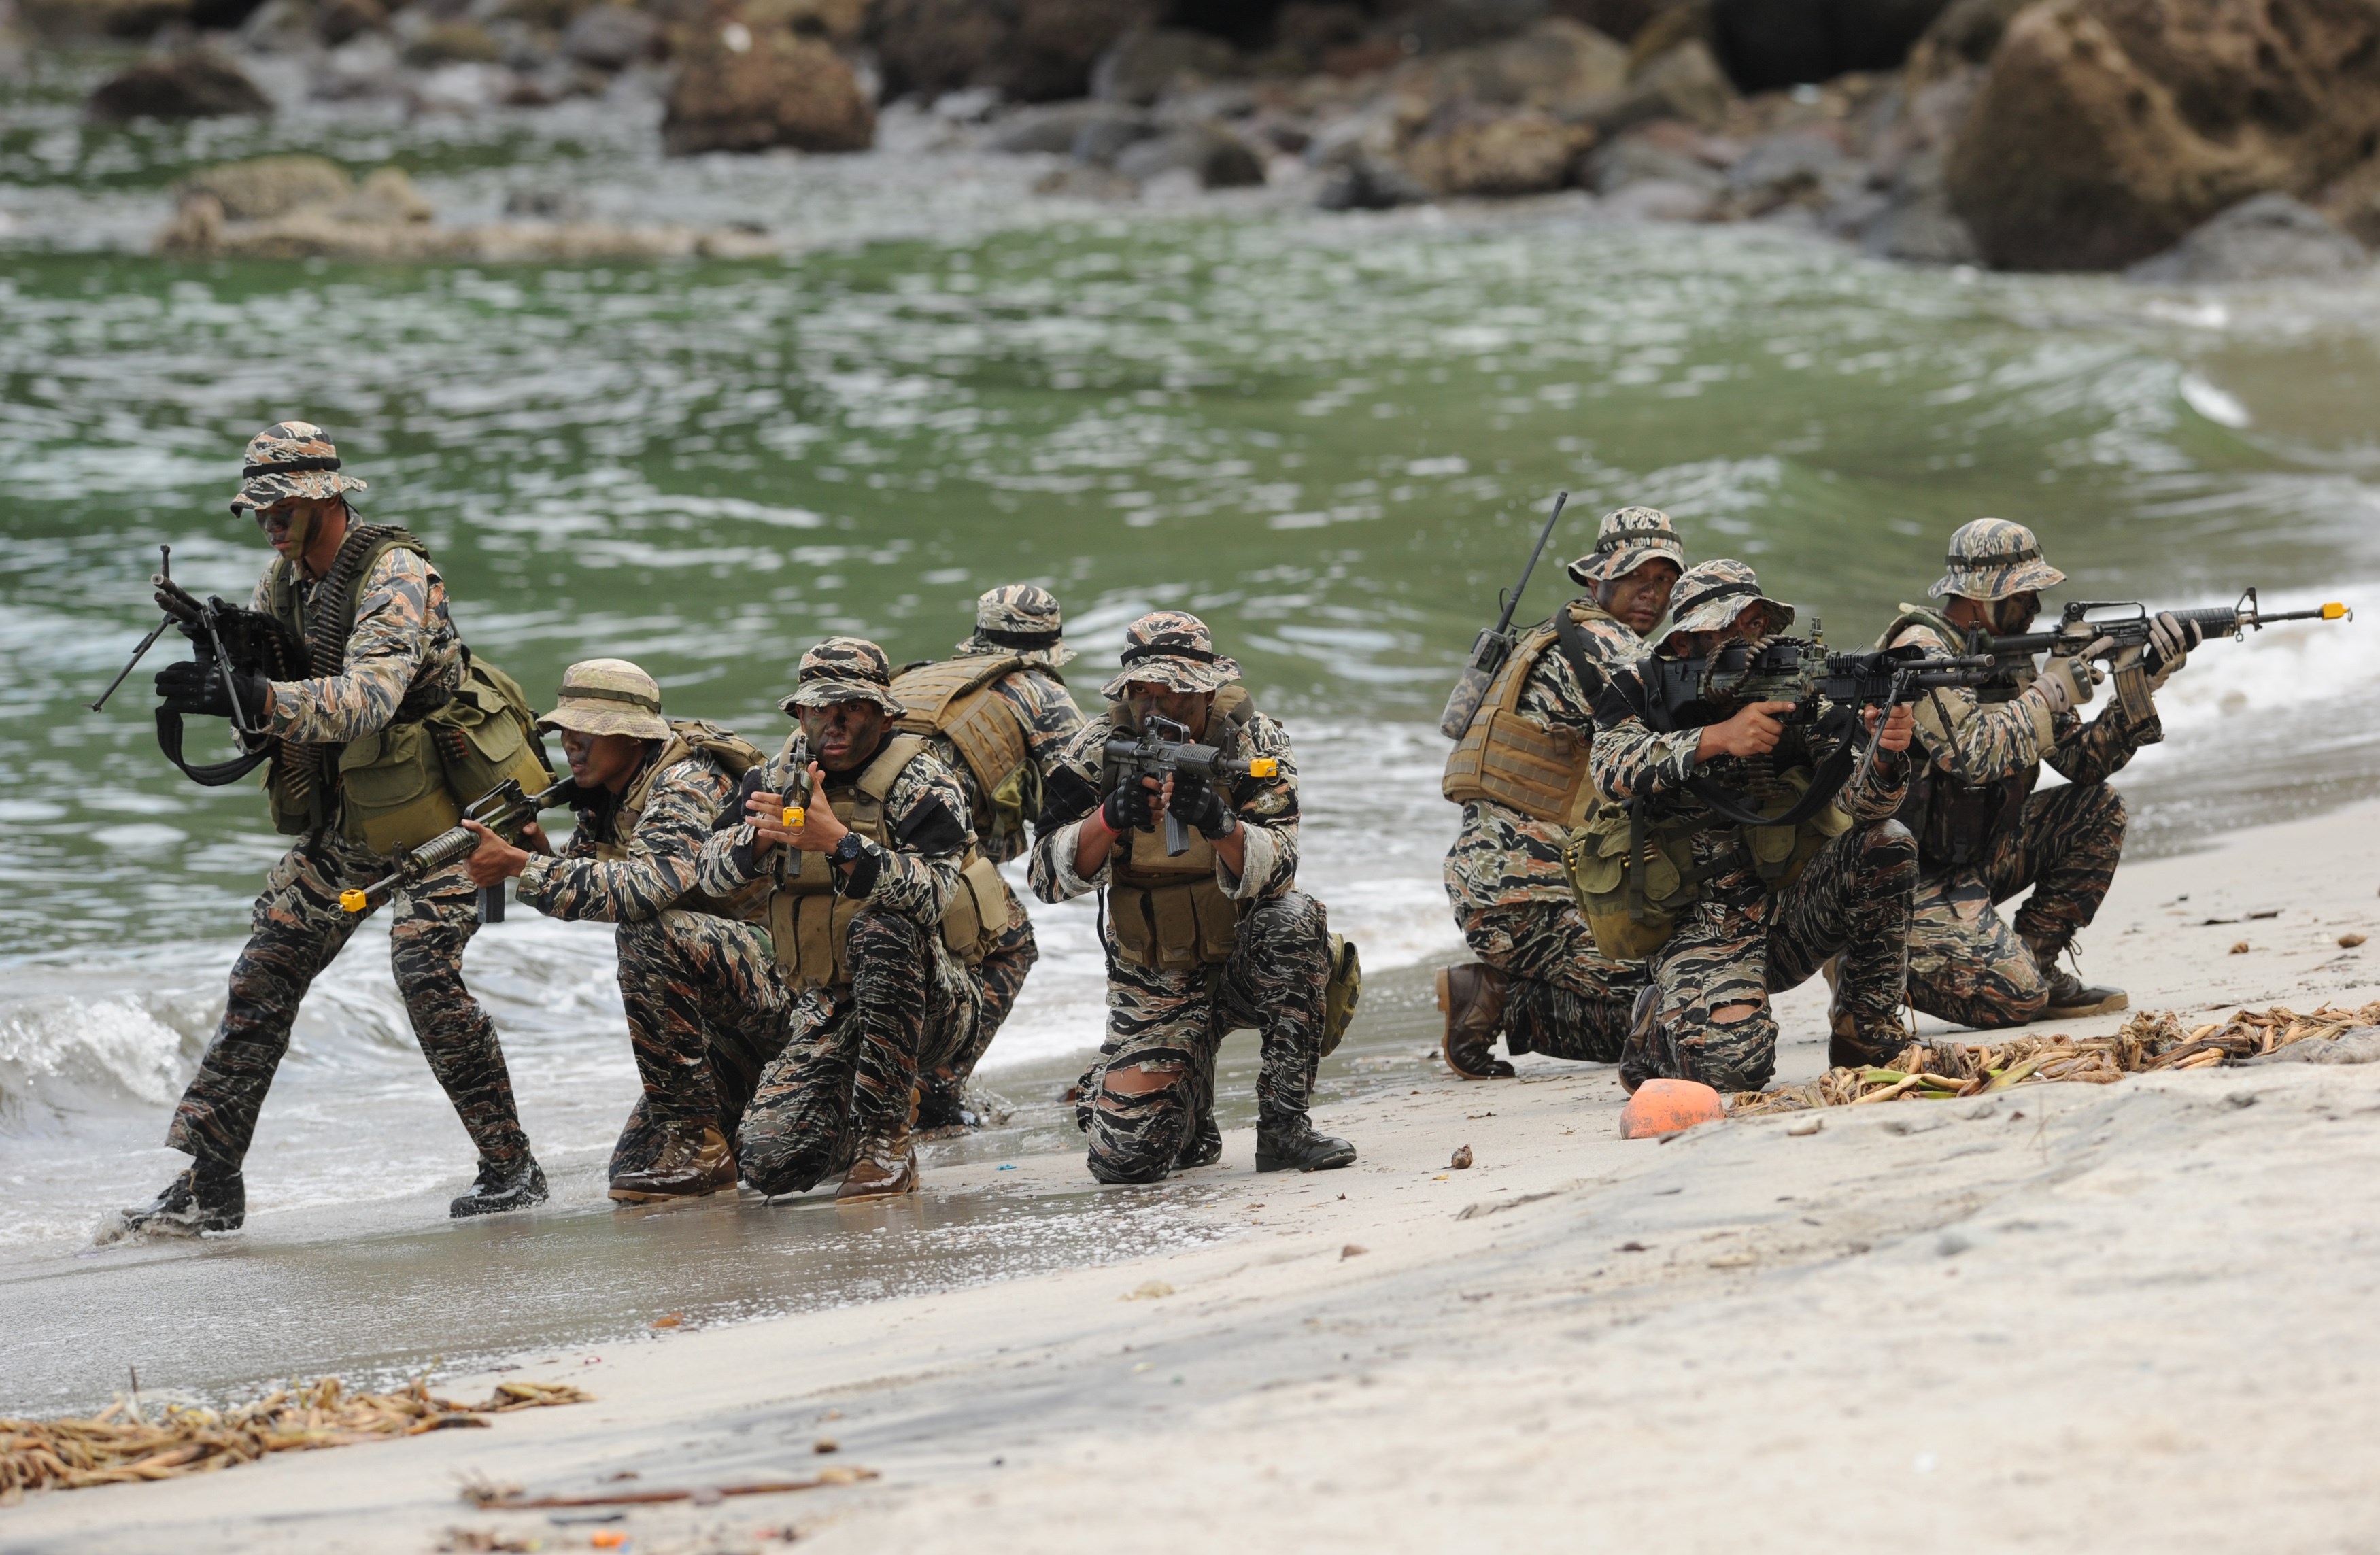 Members of the Philippine Navy Special Operations Group (NAVSOG) take their positions as they simulate the rescue of a hostage victim as part of an amphibious raid and special operations exercise by the navy at a marine training base in the town of Ternate in Cavite province, the Philippines, on Sept. 24, 2015, days after gunmen abducted three foreigners and one Filipina from a luxury island resort on Samal island (Ted Alijibe—AFP/Getty Images)